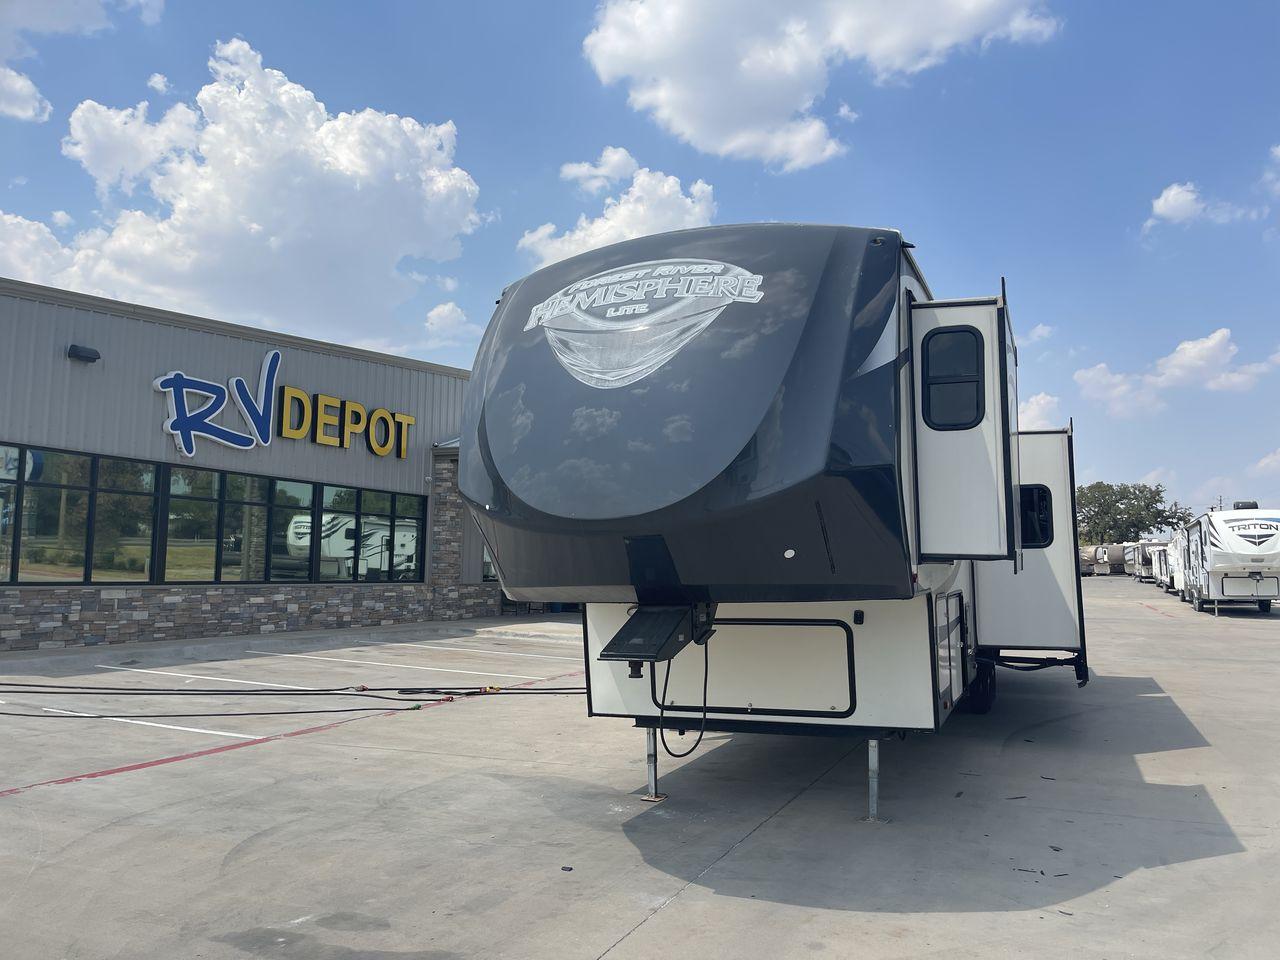 2016 TAN FOREST RIVER SALEMHEMISPHERE356QB (4X4FSBM24GU) , Length: 34 ft | Dry Weight: 7,294 lbs | Slides: 2 transmission, located at 4319 N Main St, Cleburne, TX, 76033, (817) 678-5133, 32.385960, -97.391212 - Photo #0